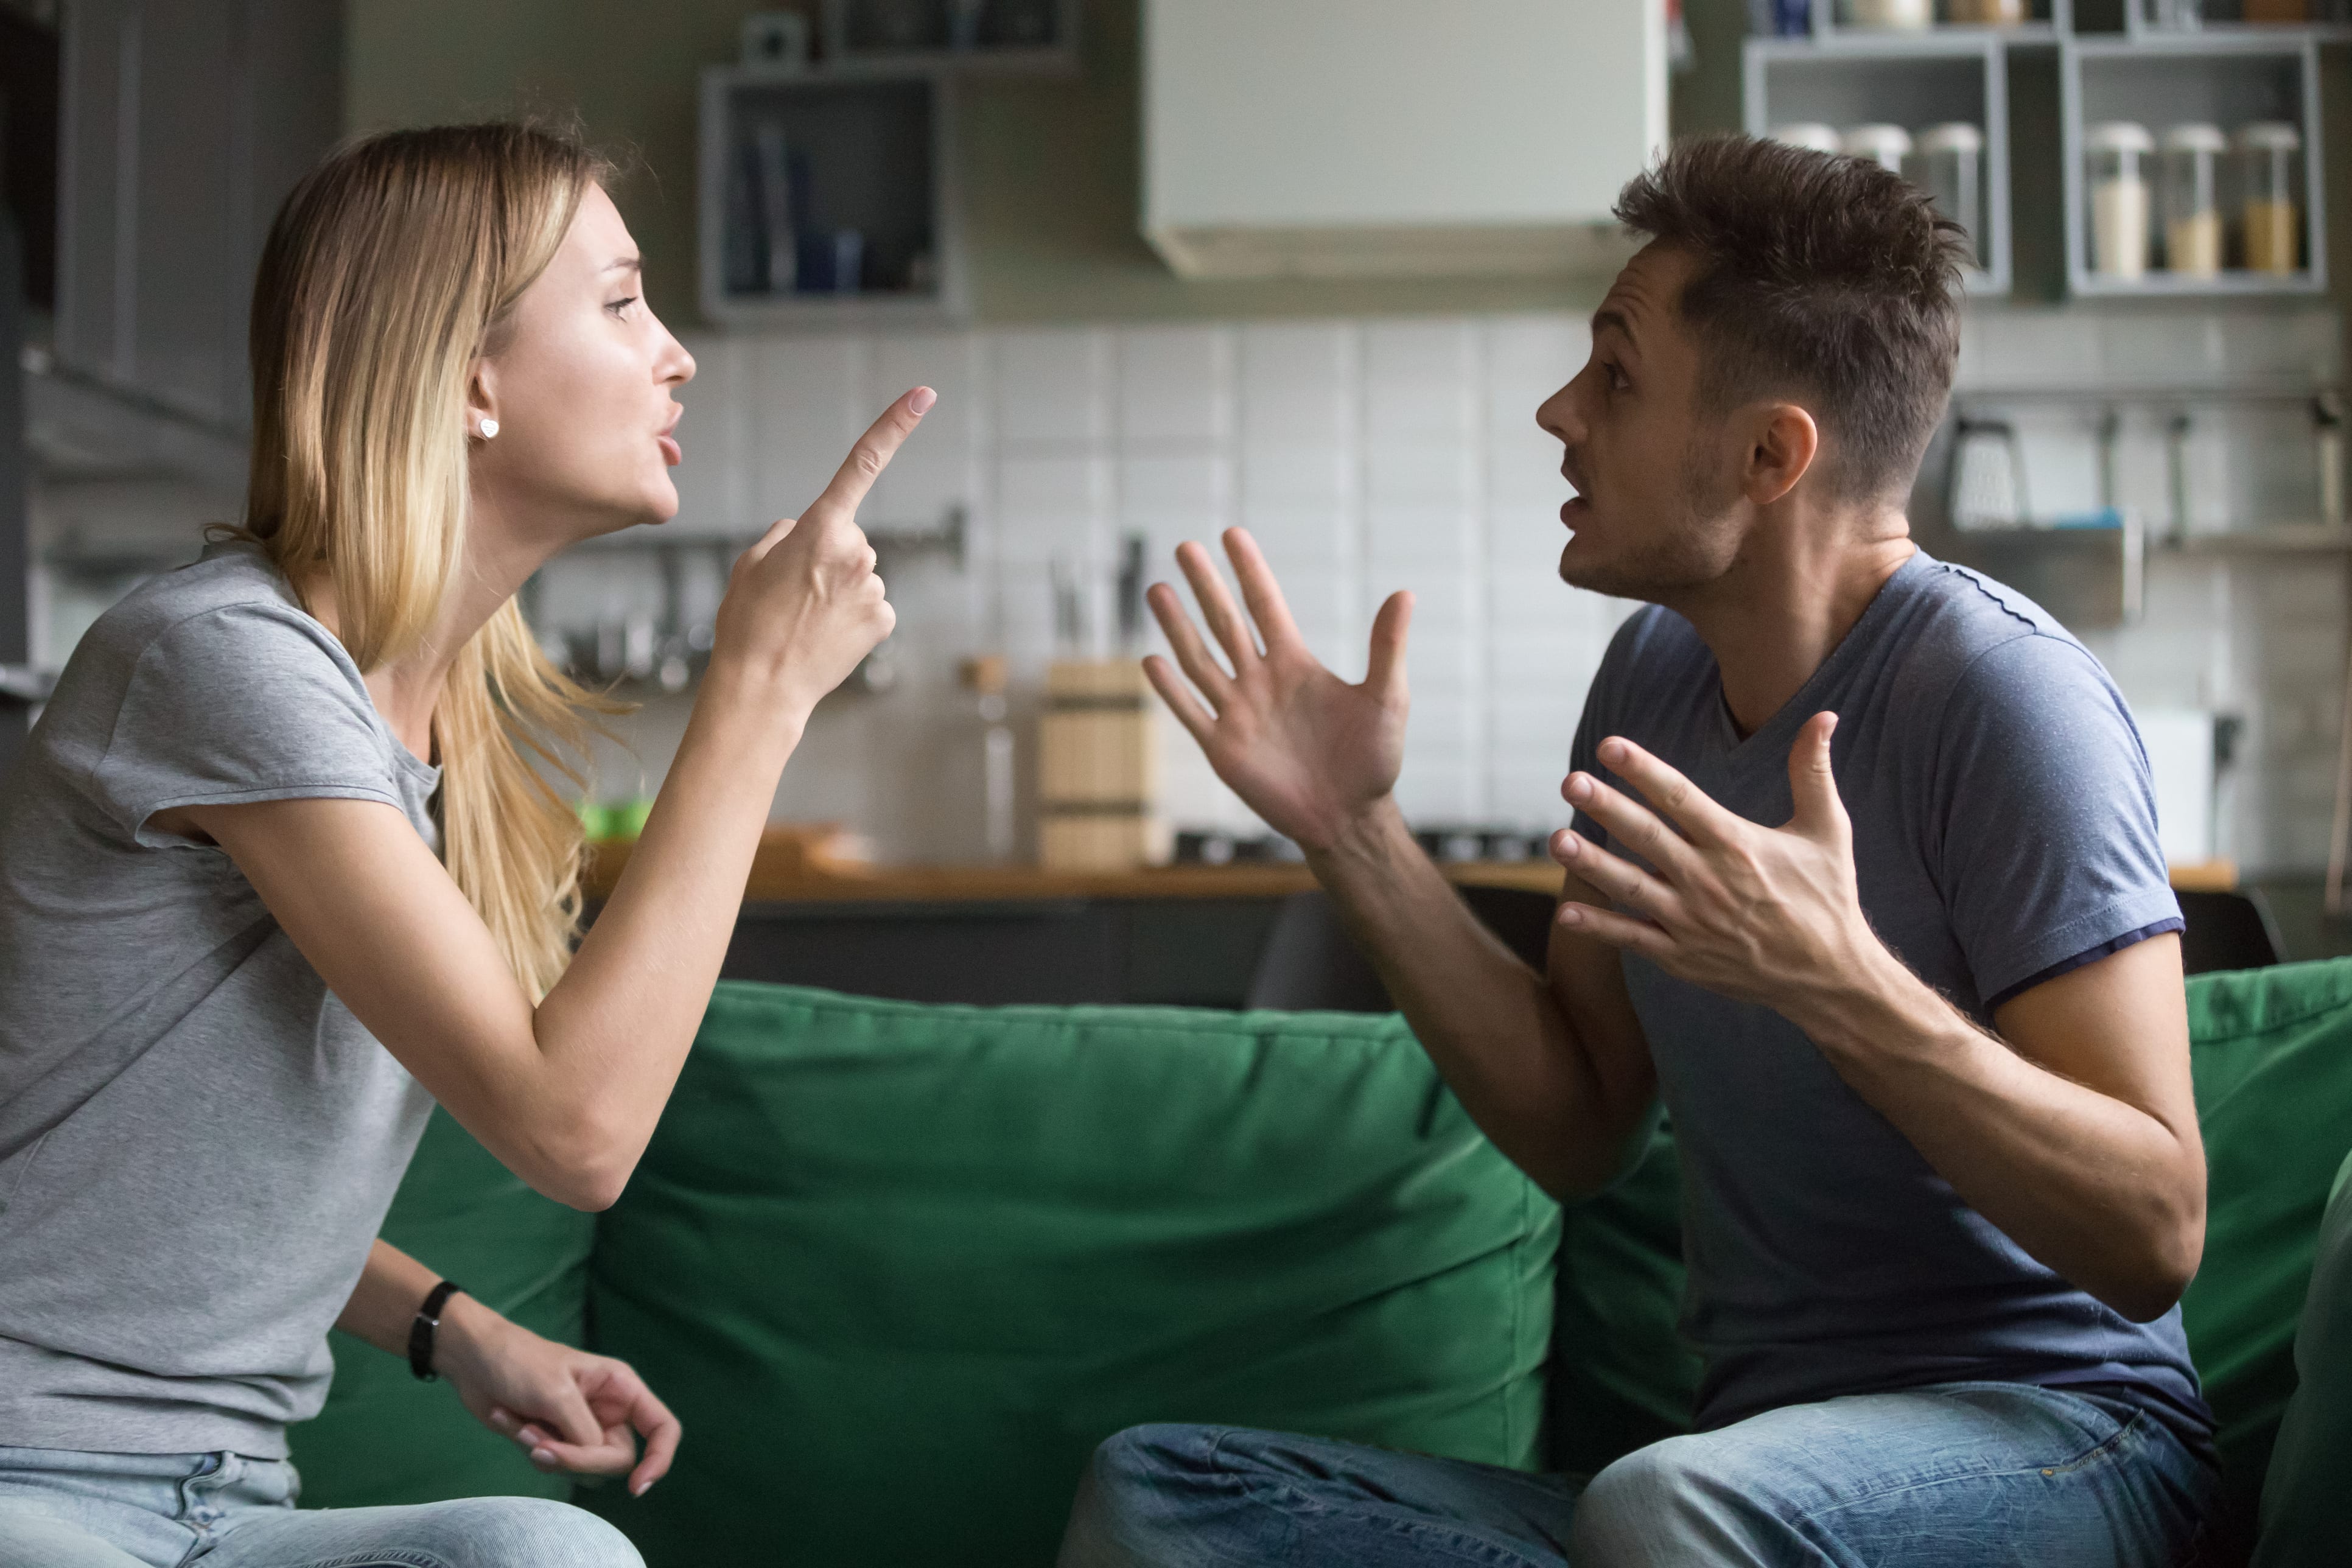 Woman sternly shaking her finger at a man with his hands up